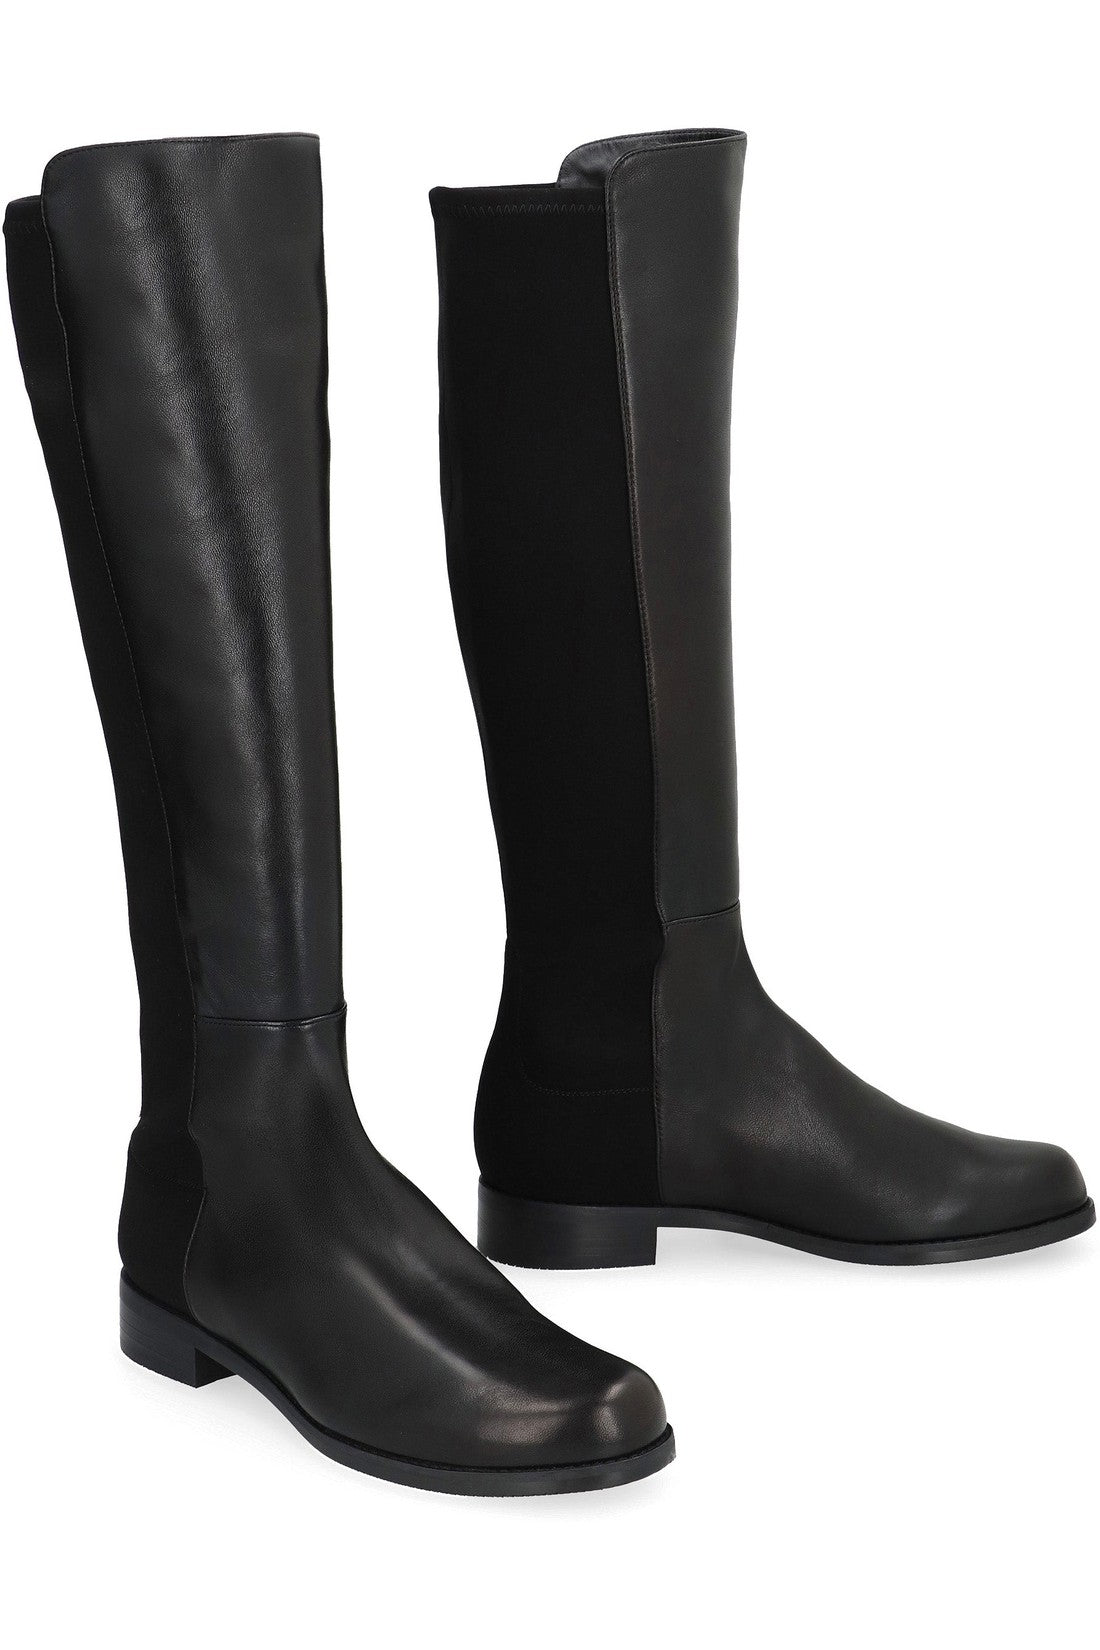 Stuart Weitzman-OUTLET-SALE-HALFNHALF leather and stretch fabric boots-ARCHIVIST